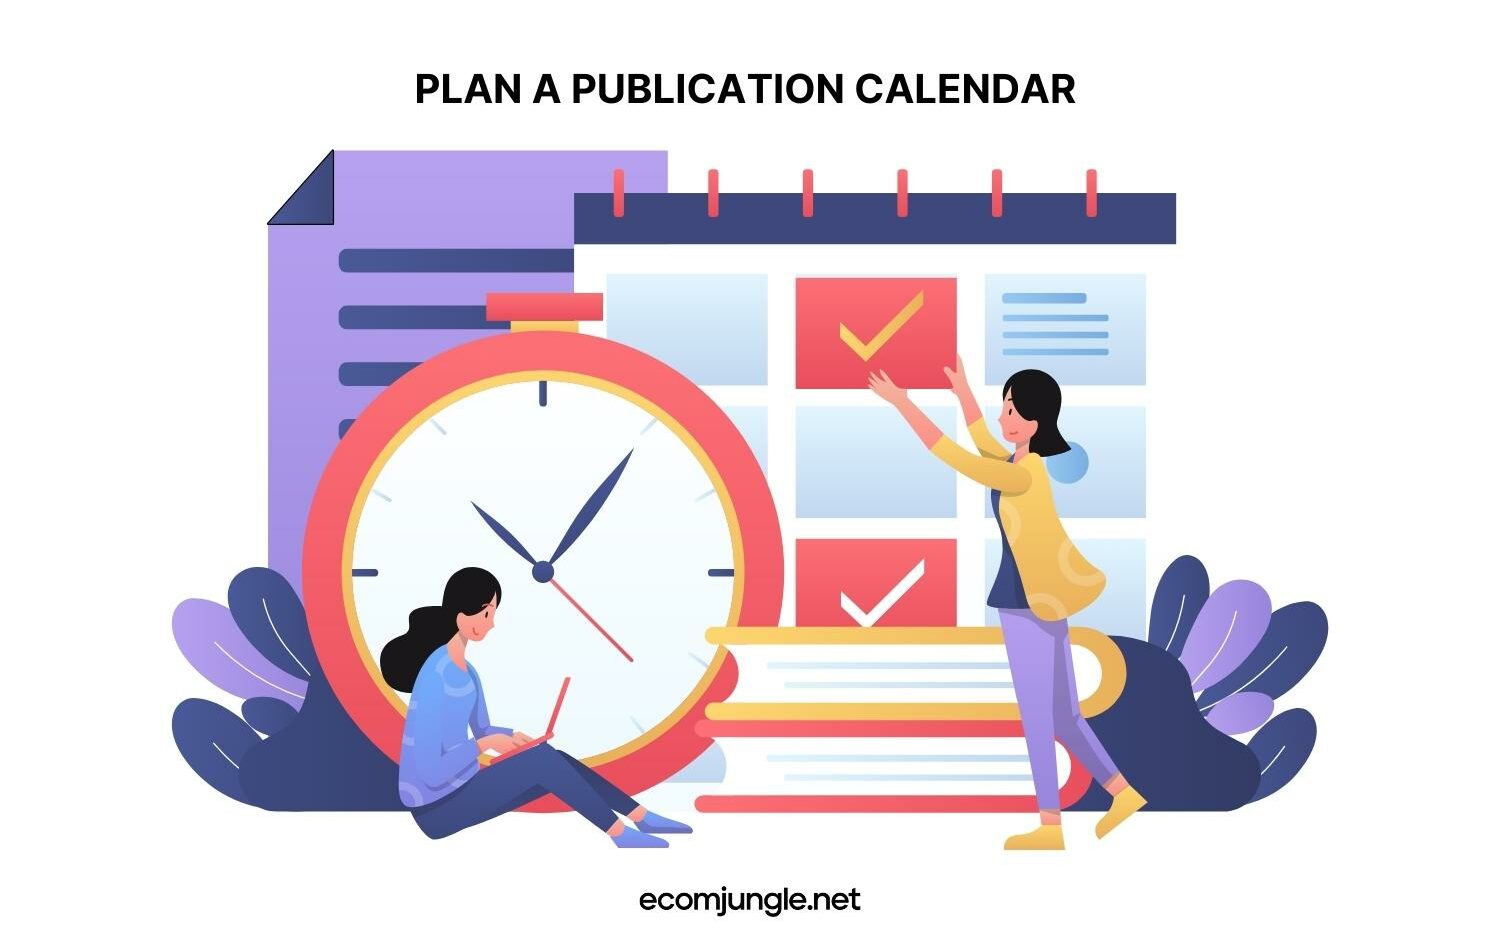 Create blog and make publication calendar to get more leads to you website